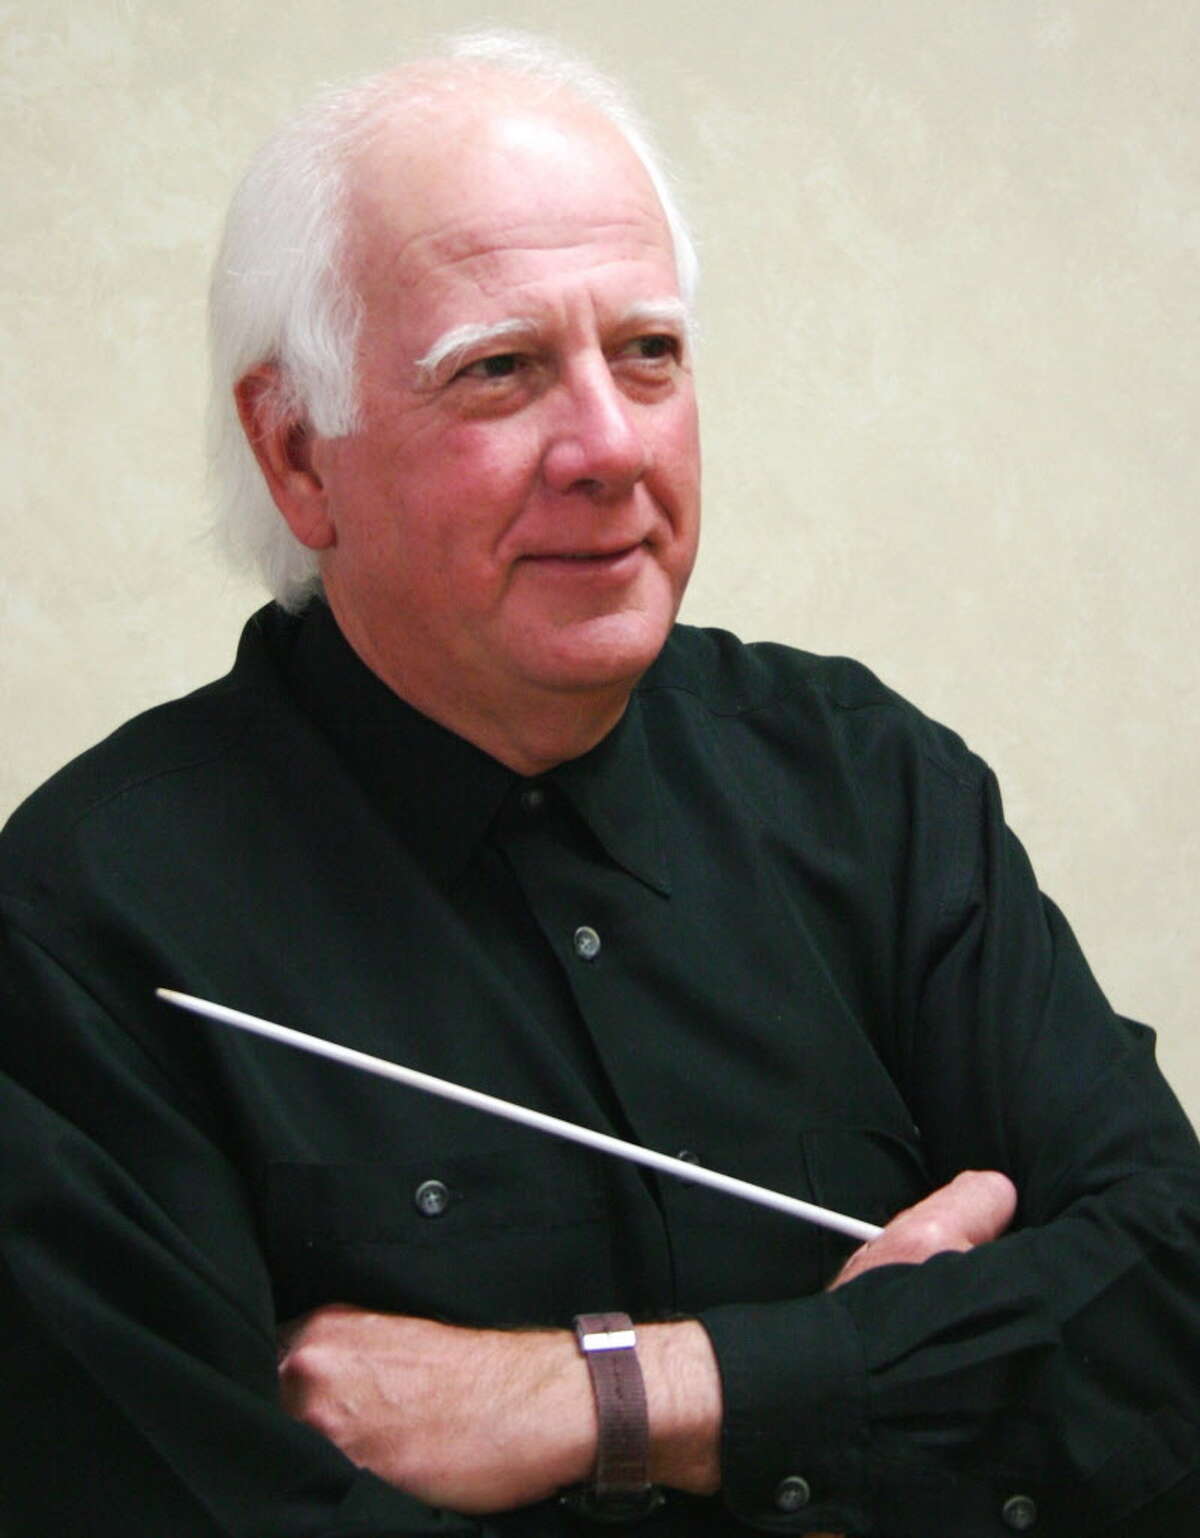 Music Director and Conductor Dr. Don Hutson leads the Conroe Symphony Orchestra in its 21st season opener on Monday at 7:30 p.m. at Conroe High School.